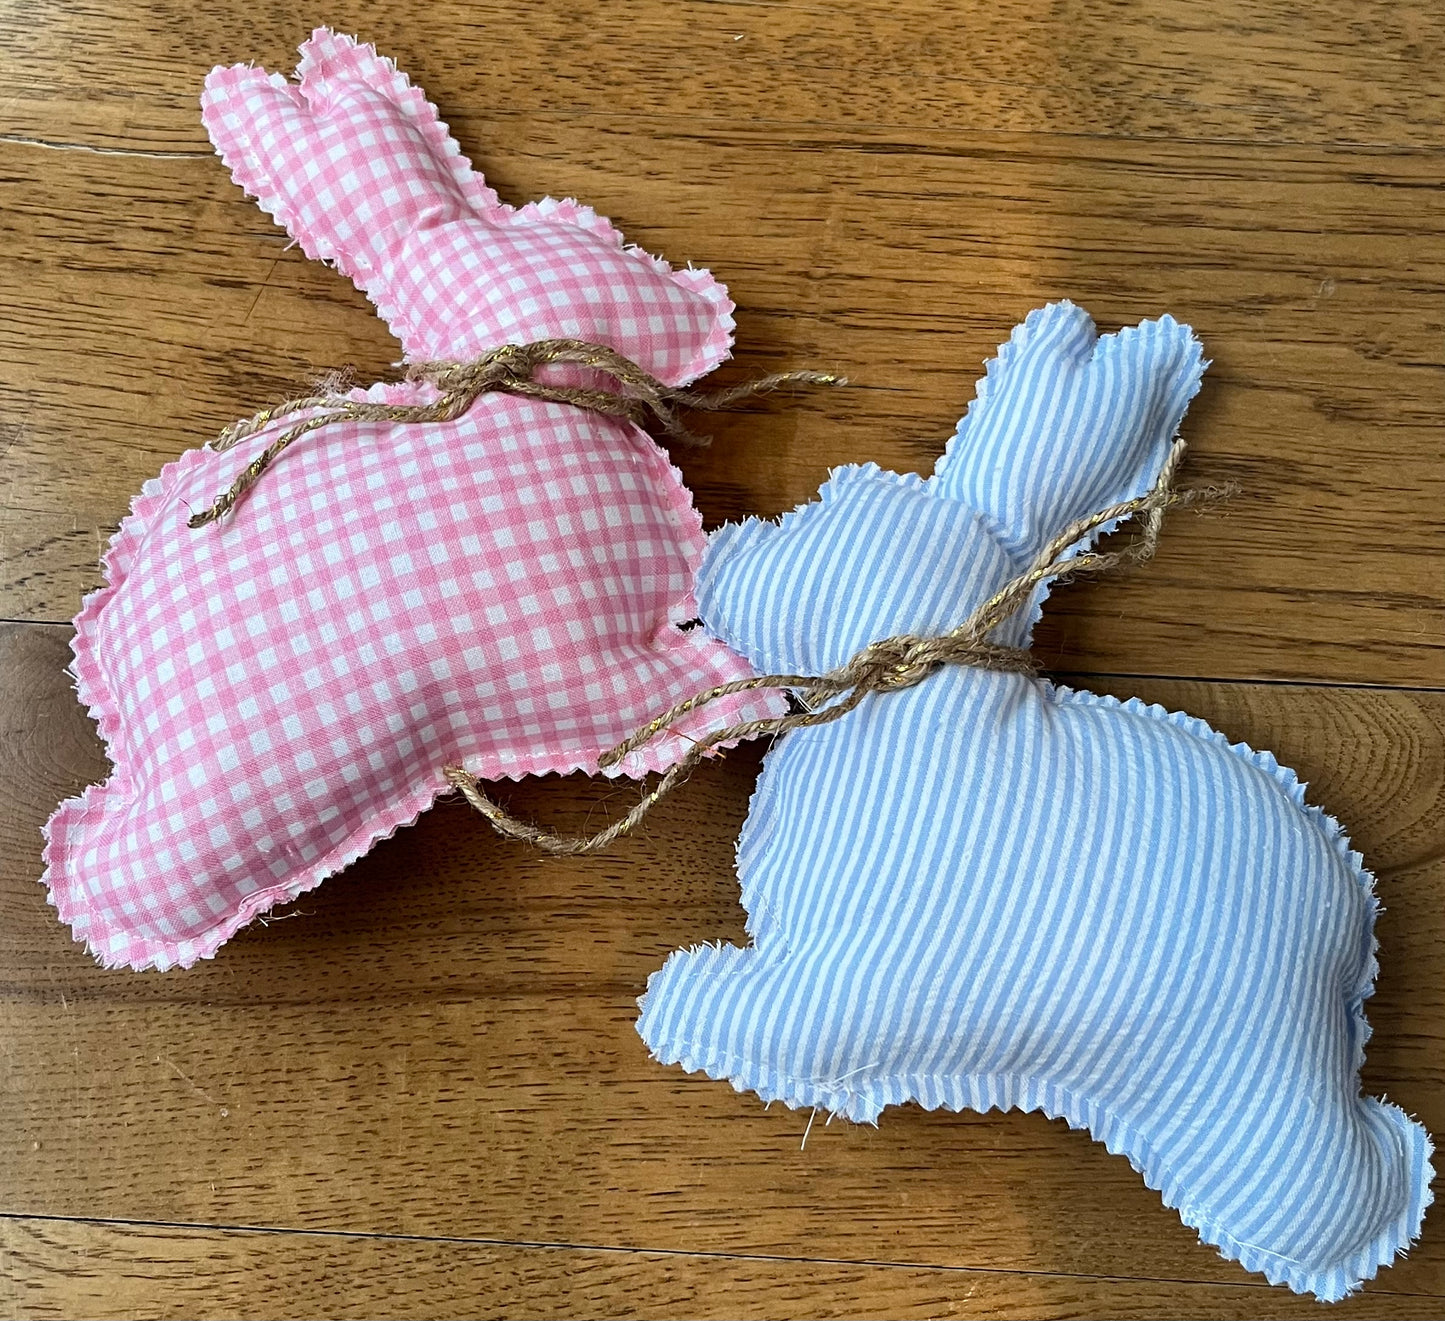 Stuffed Bunnies for Decorating